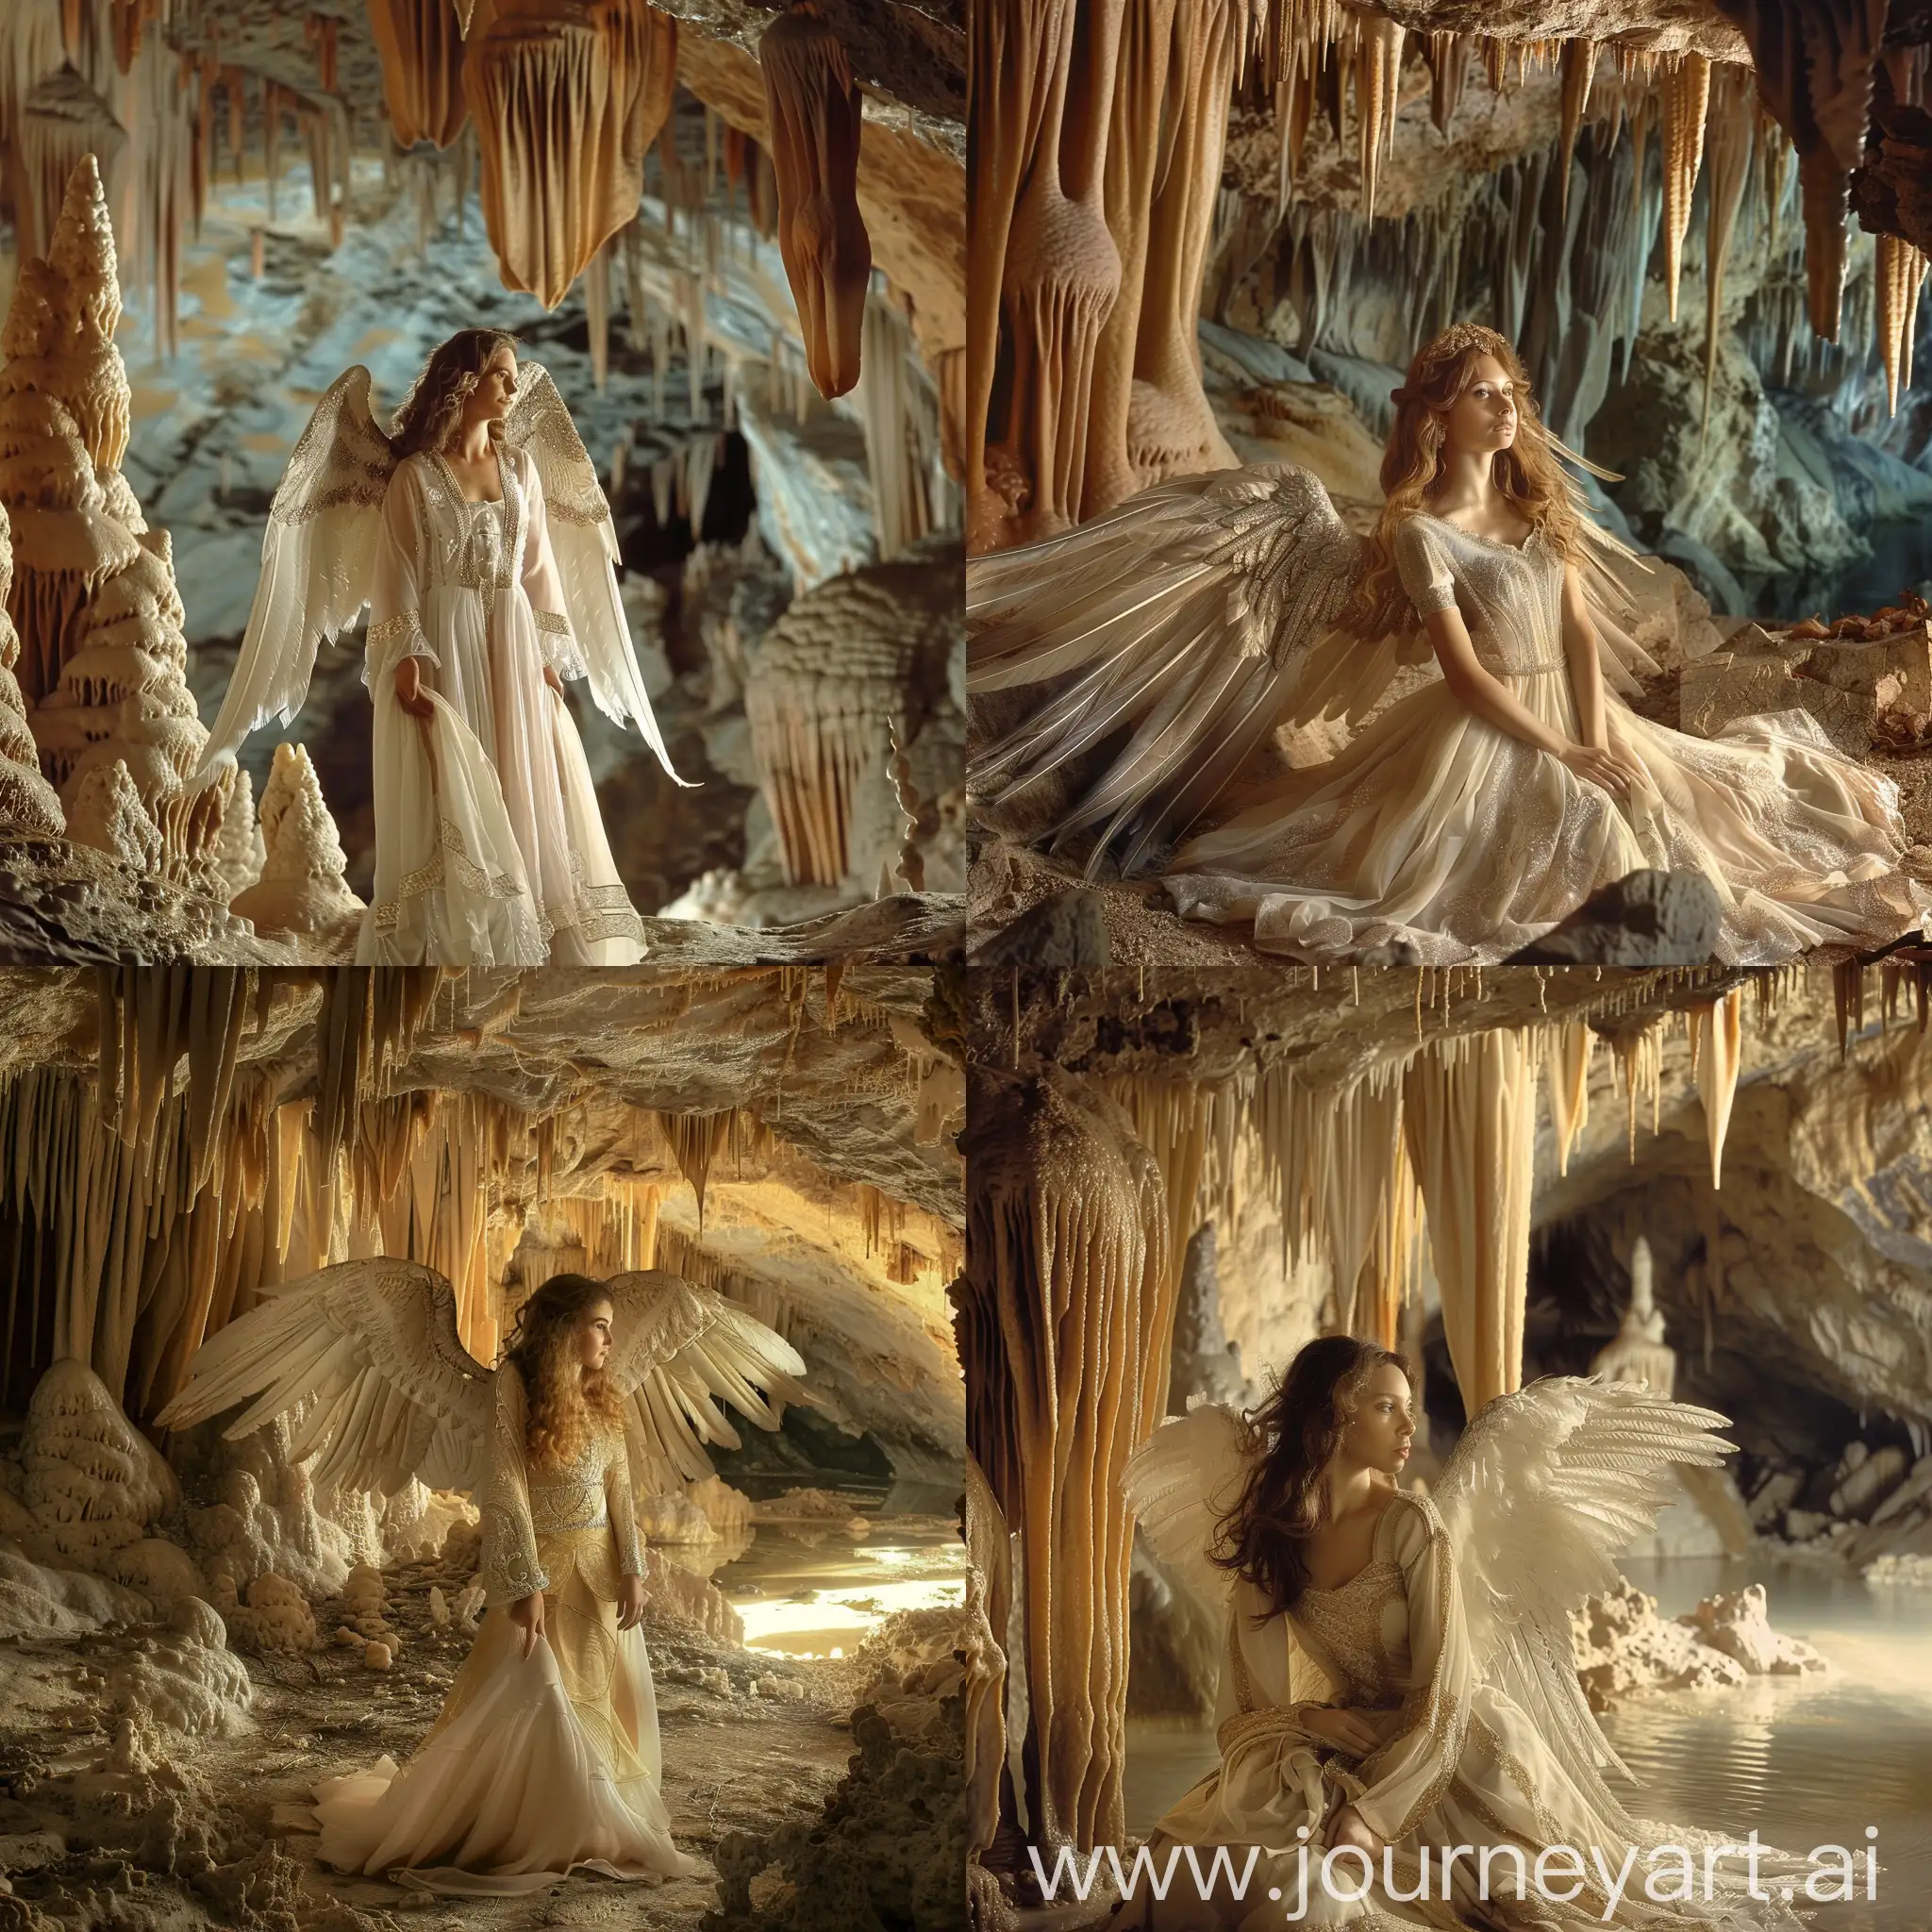 A beautiful medieval angel woman in a cave with stalagmites and stalactites.